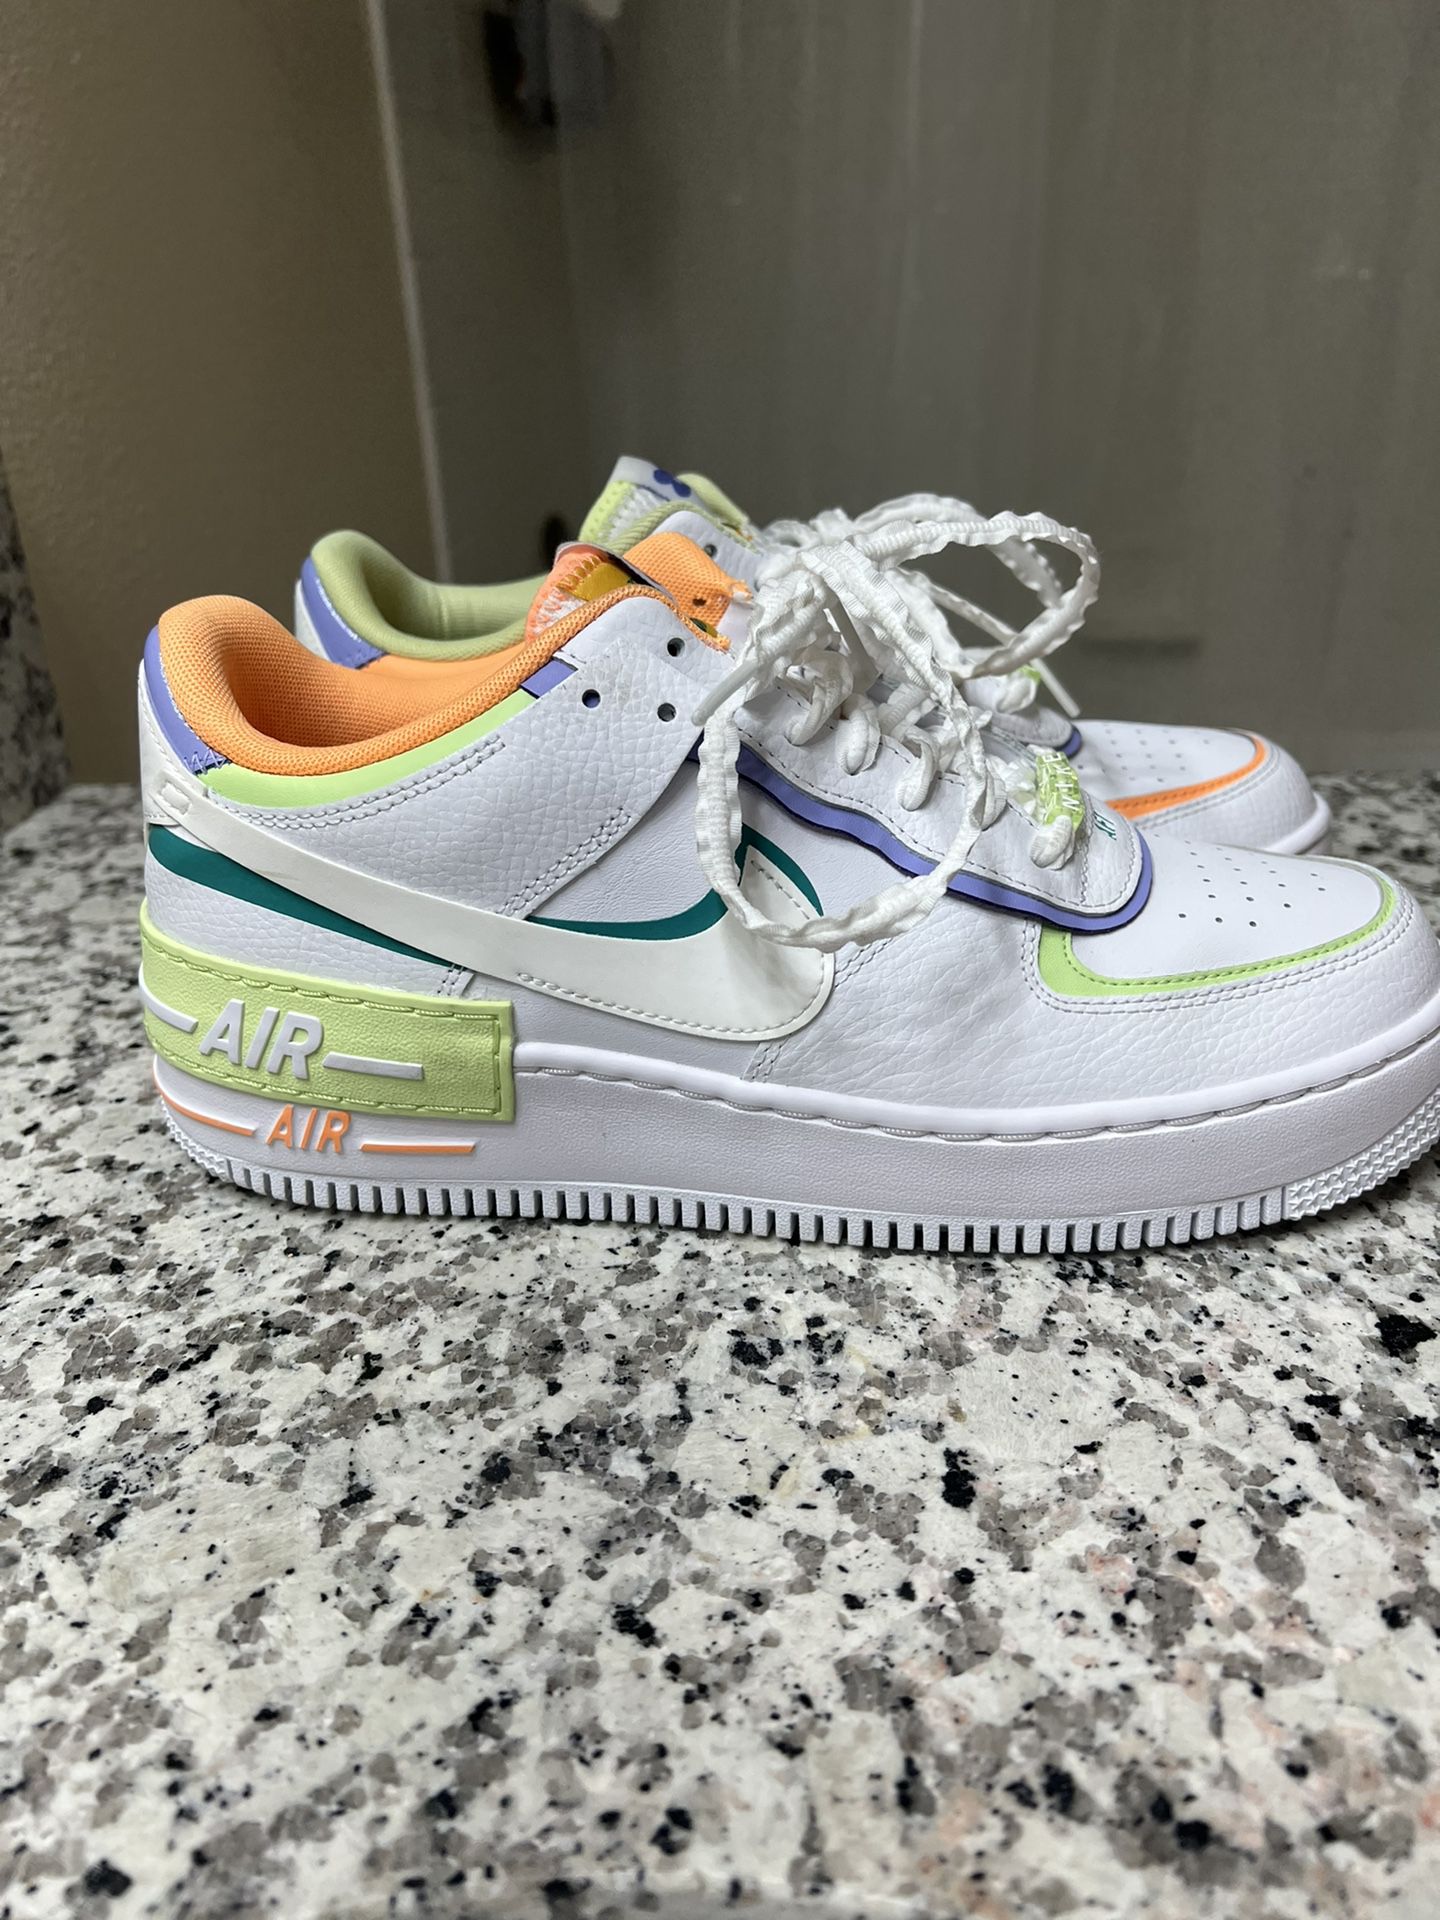 Nike Air Force 1 Sneaker Outfit Ideas